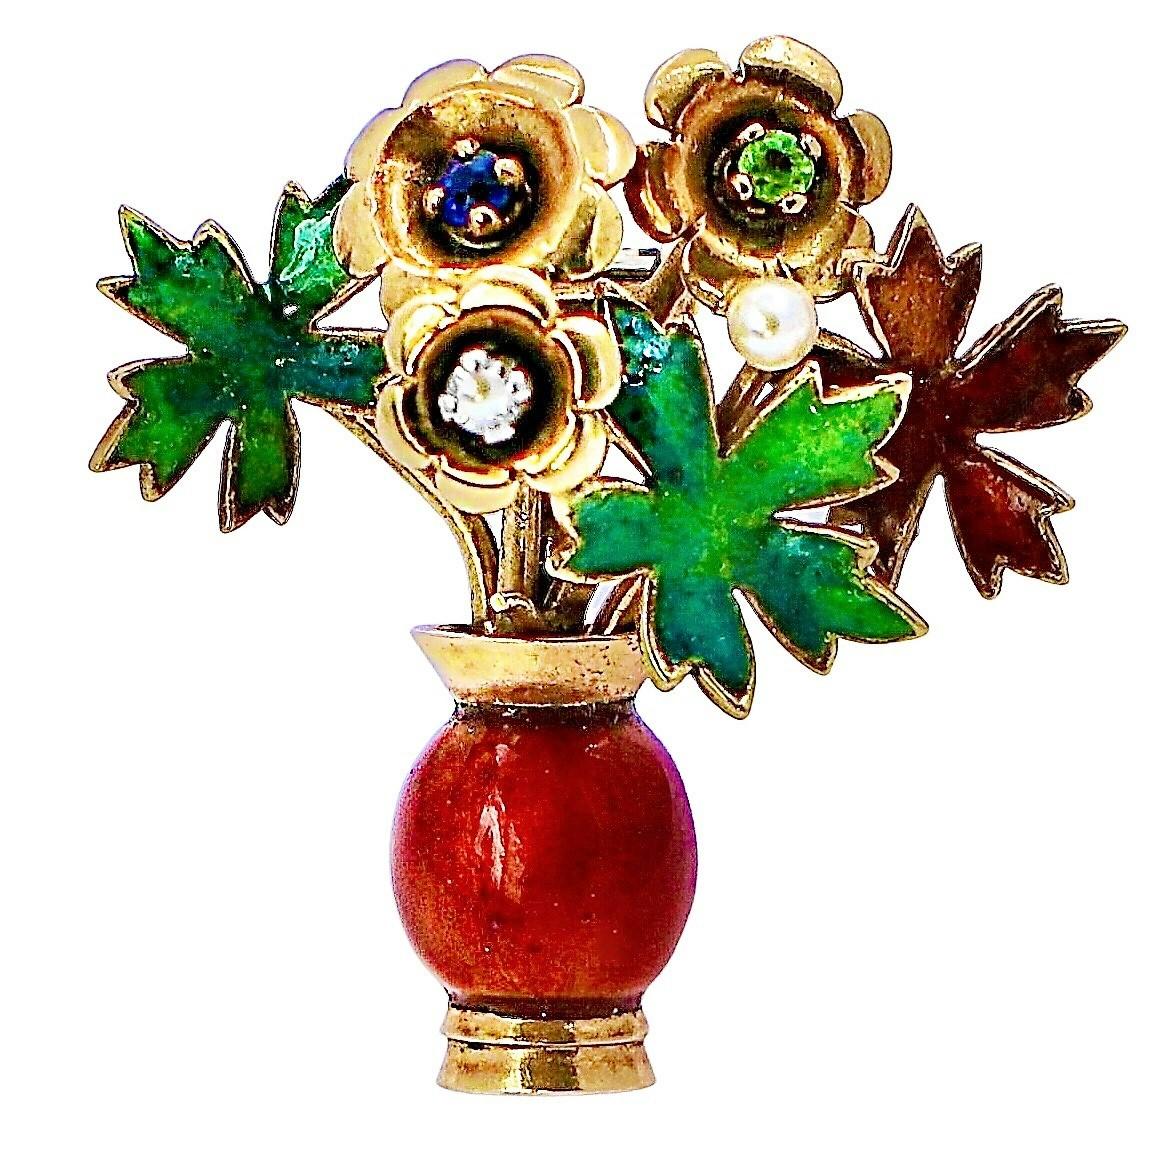 This distinctive 18K yellow gold original floral vase brooch is handmade and features three articulated flowers, each with a precious stone center. Green and bronze color enamel is delicately applied to the leaves and the vase with one natural pearl